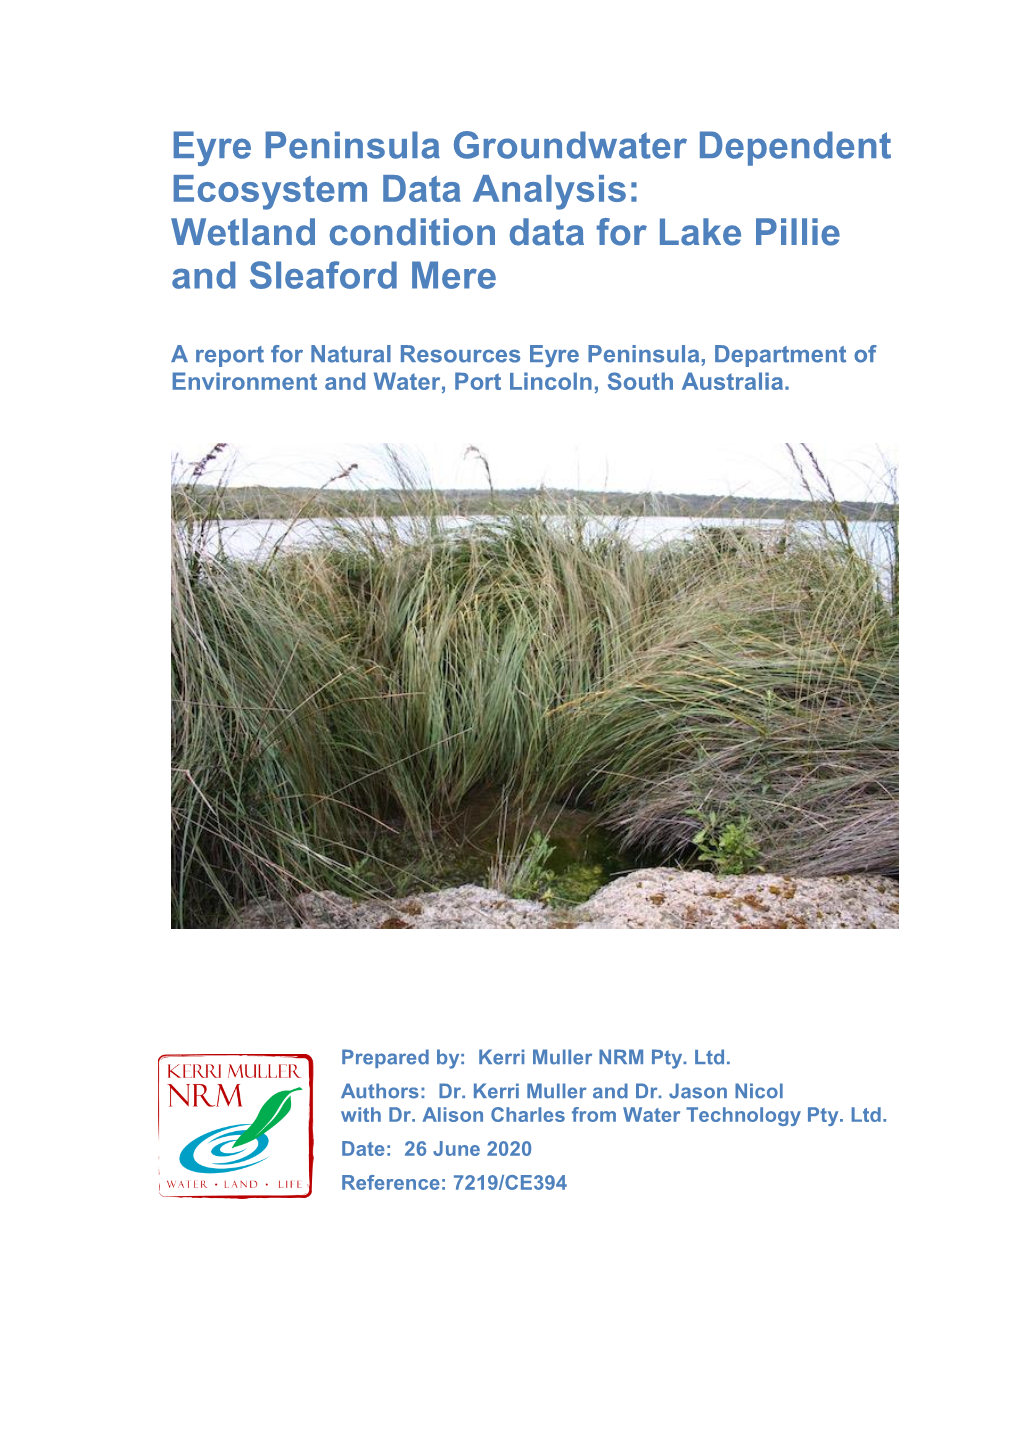 Eyre Peninsula Groundwater Dependent Ecosystem Data Analysis: Wetland Condition Data for Lake Pillie and Sleaford Mere